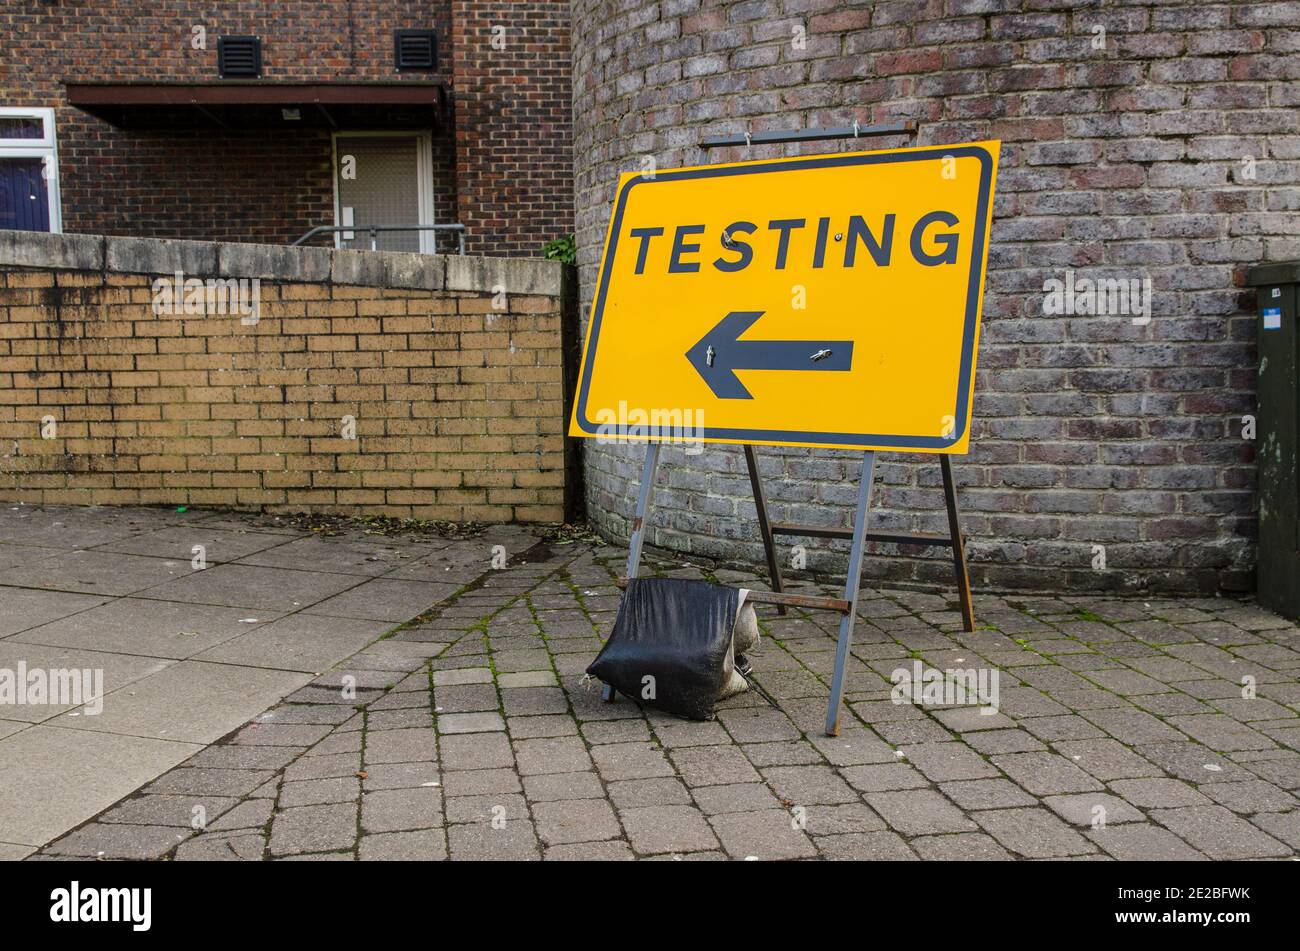 A direction sign for pedestrians pointing in the direction of a COVID testing centre against an annonymous brick wall. Stock Photo